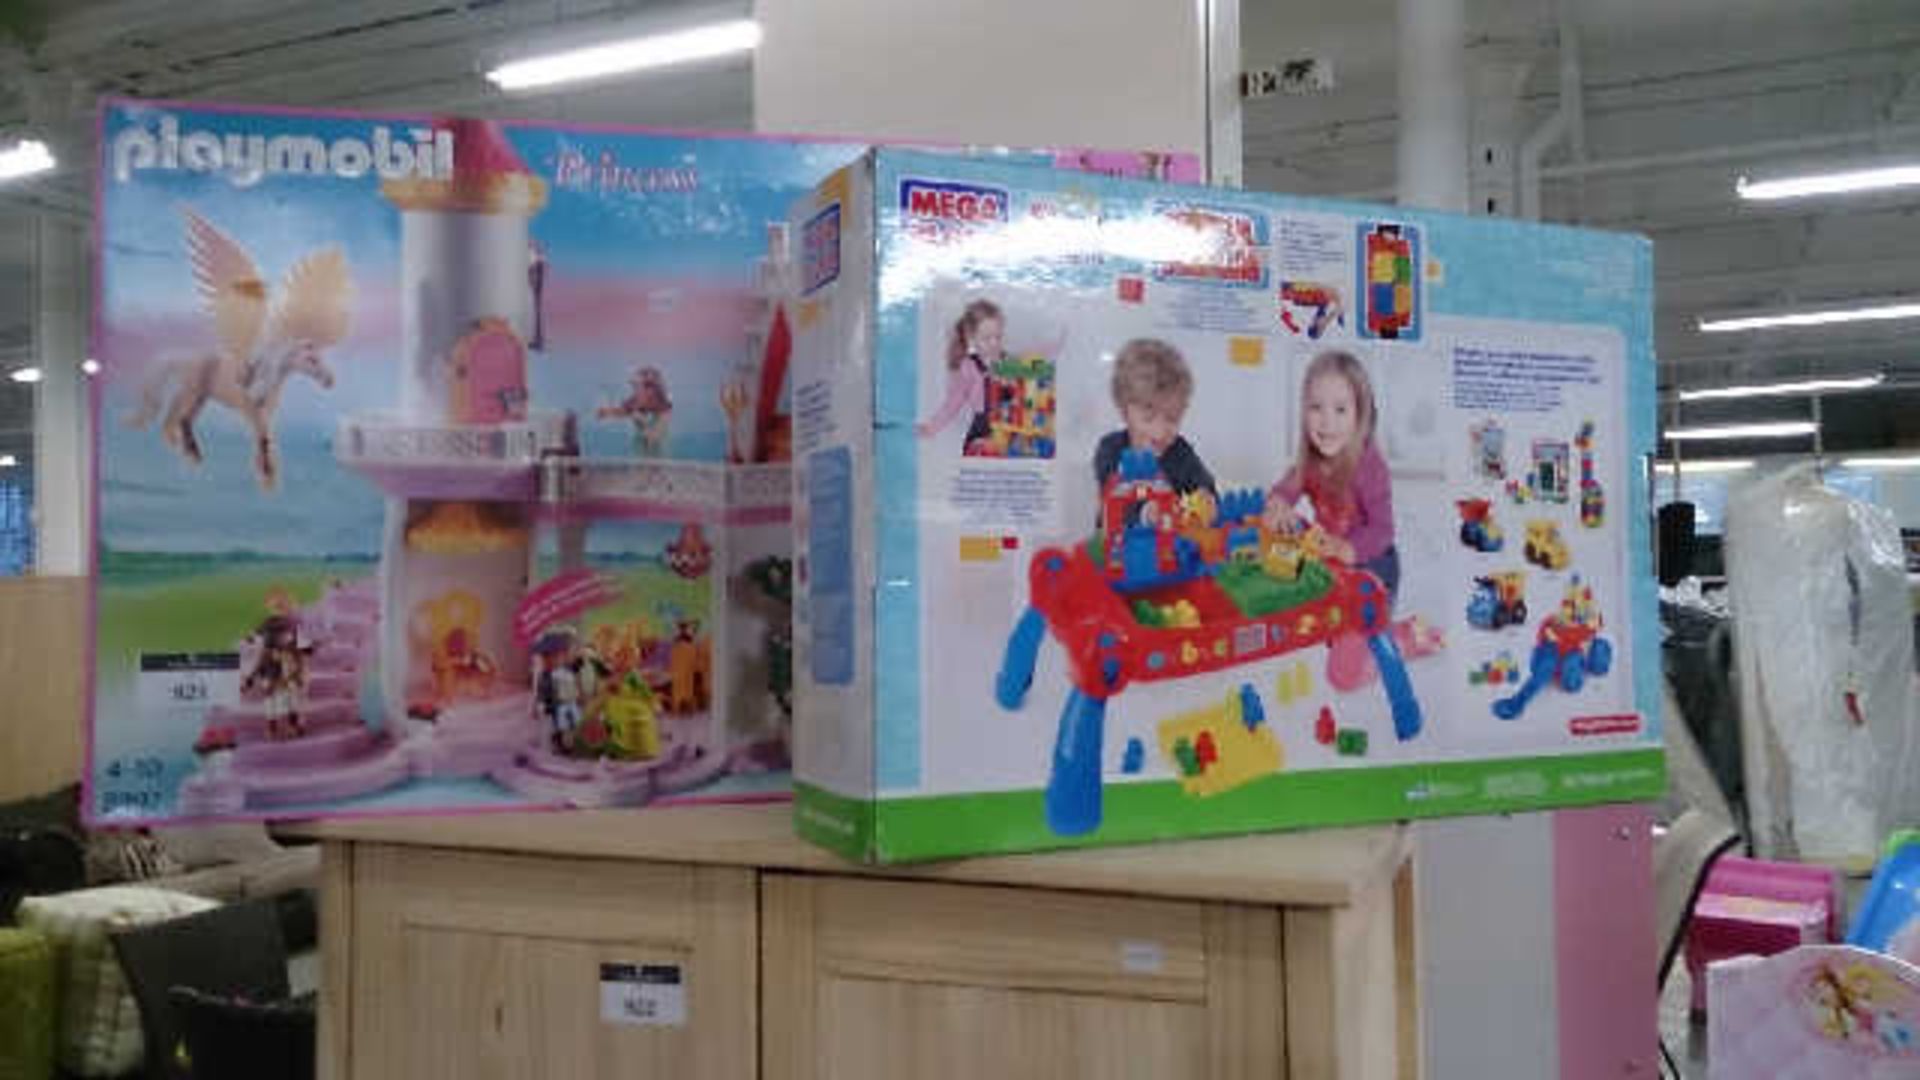 2 ITEMS TO INCLUDE PLAYMOBIL PRINCESS CASTLE AND MEGA BLOCKS FIRST BUILDERS STORAGE TABLE